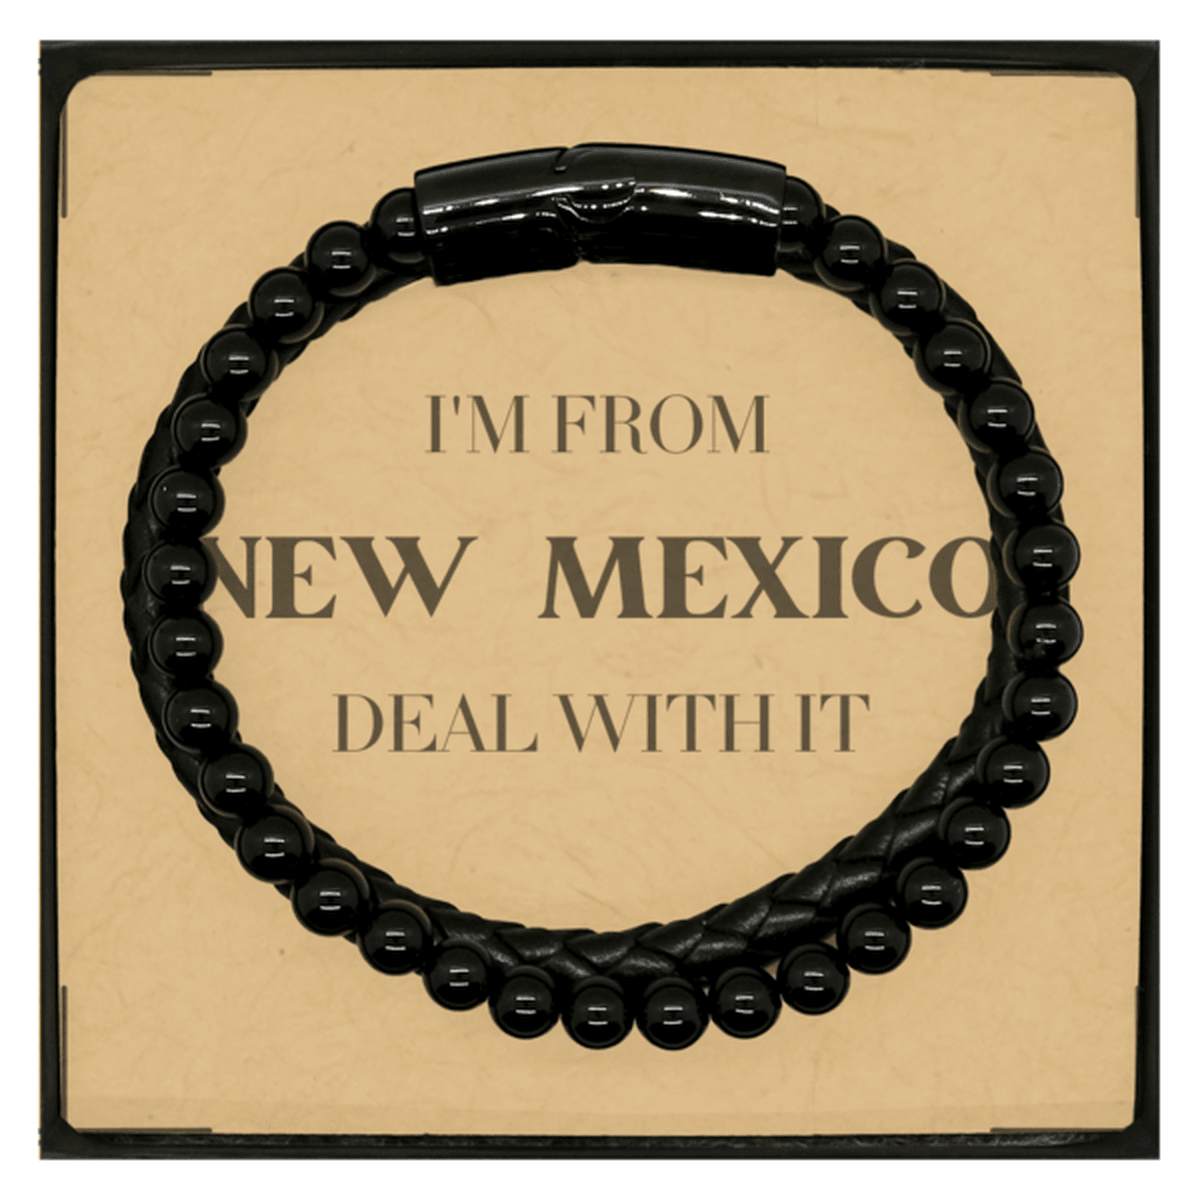 I'm from New Mexico, Deal with it, Proud New Mexico State Gifts, New Mexico Stone Leather Bracelets Gift Idea, Christmas Gifts for New Mexico People, Coworkers, Colleague - Mallard Moon Gift Shop